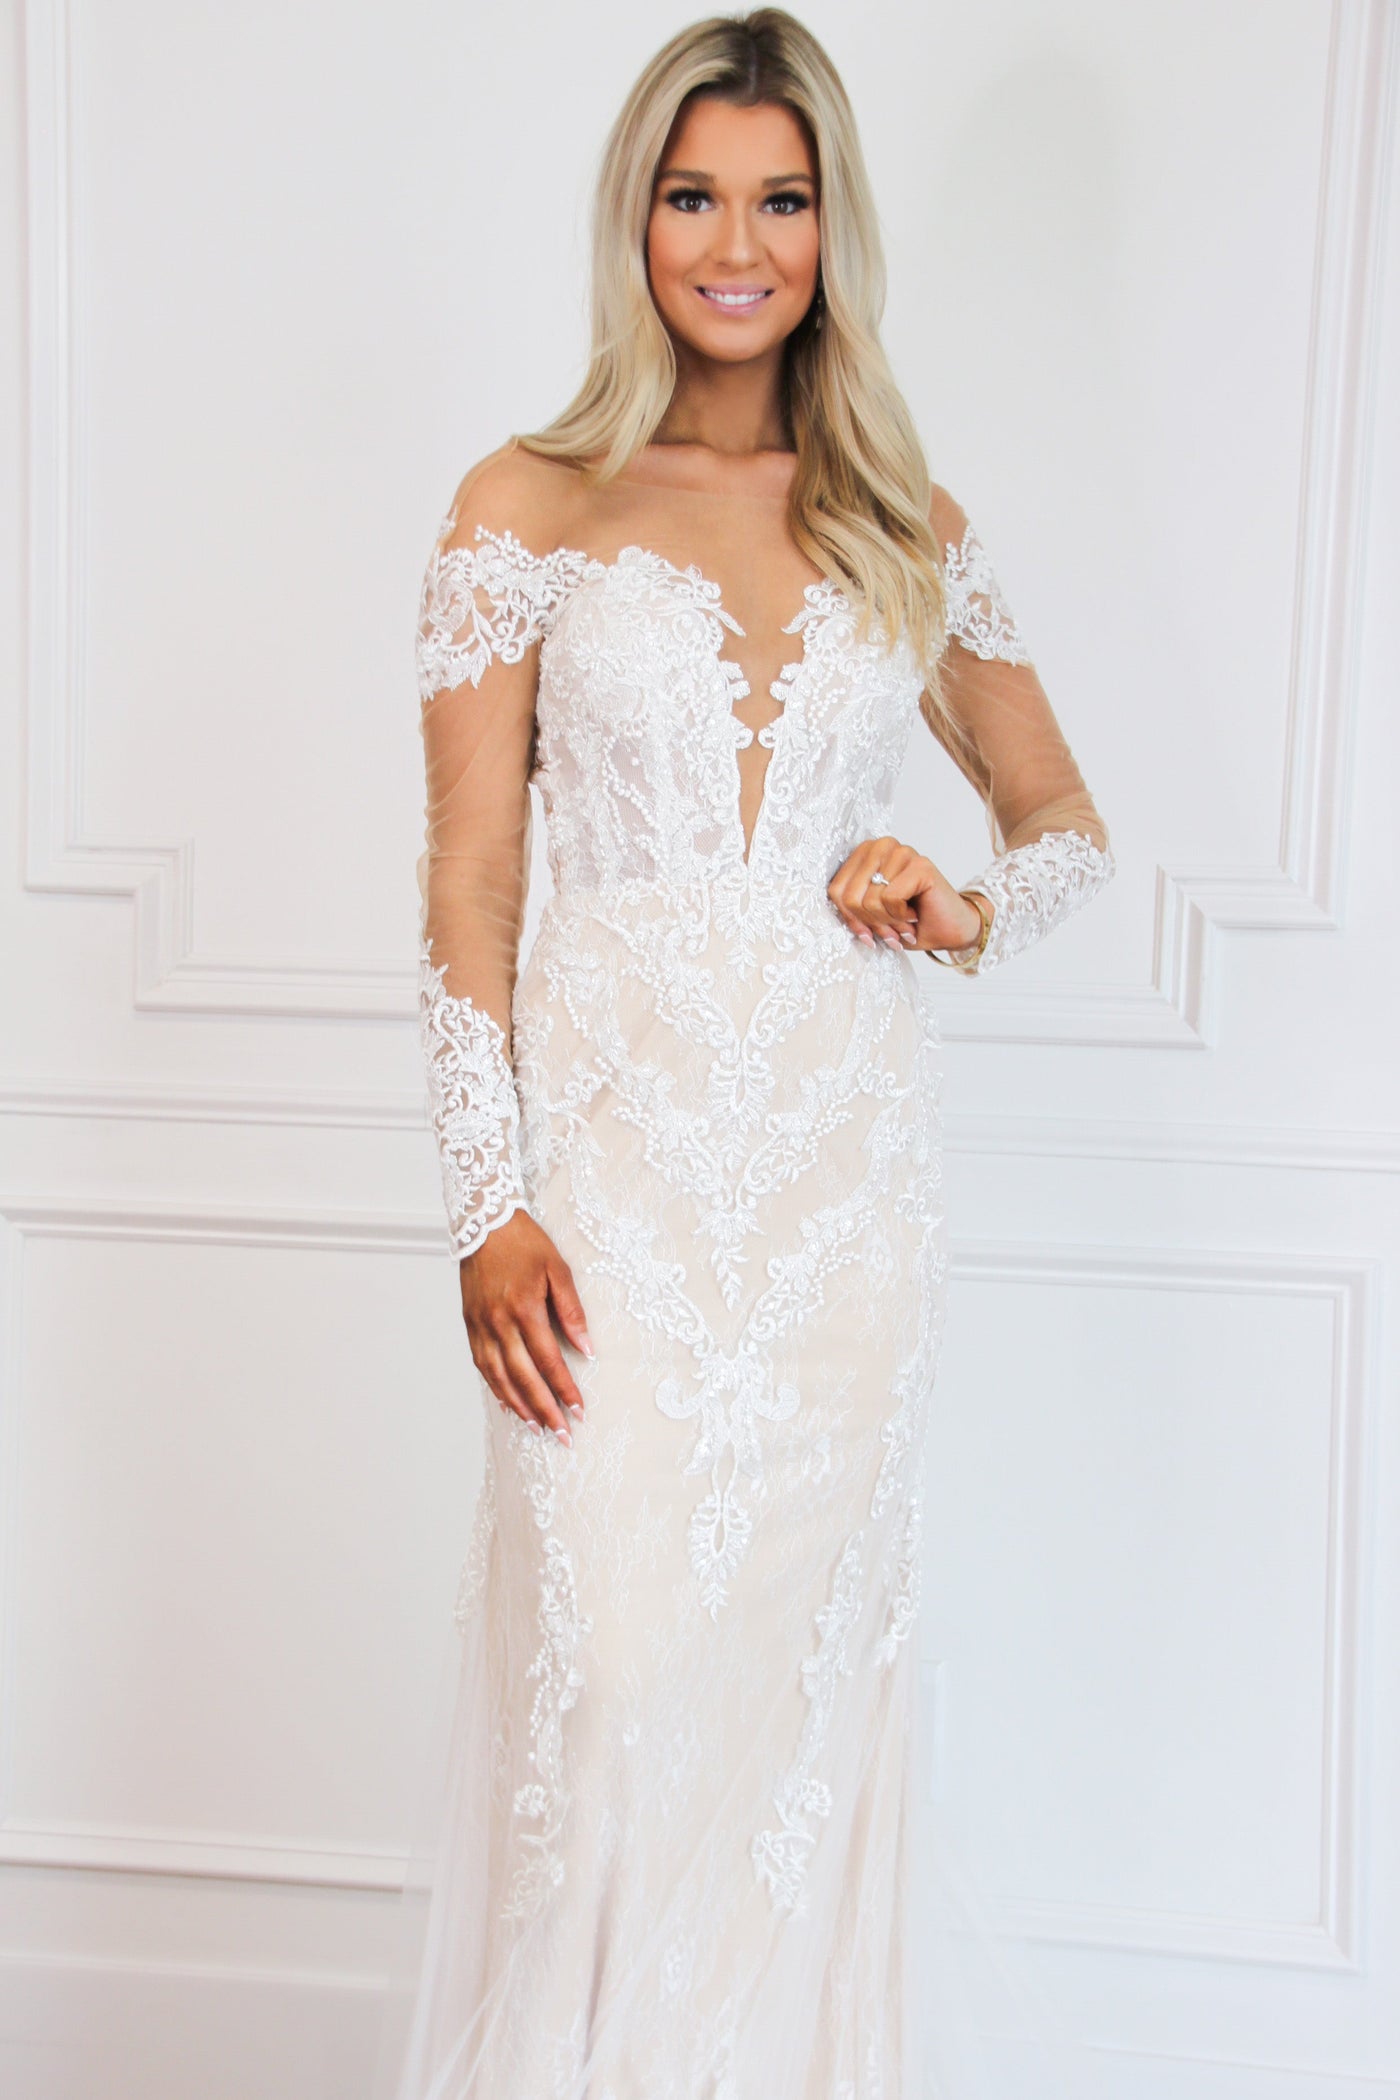 Bella and Bloom Boutique - Forever In Love Lace Wedding Dress: White/Nude